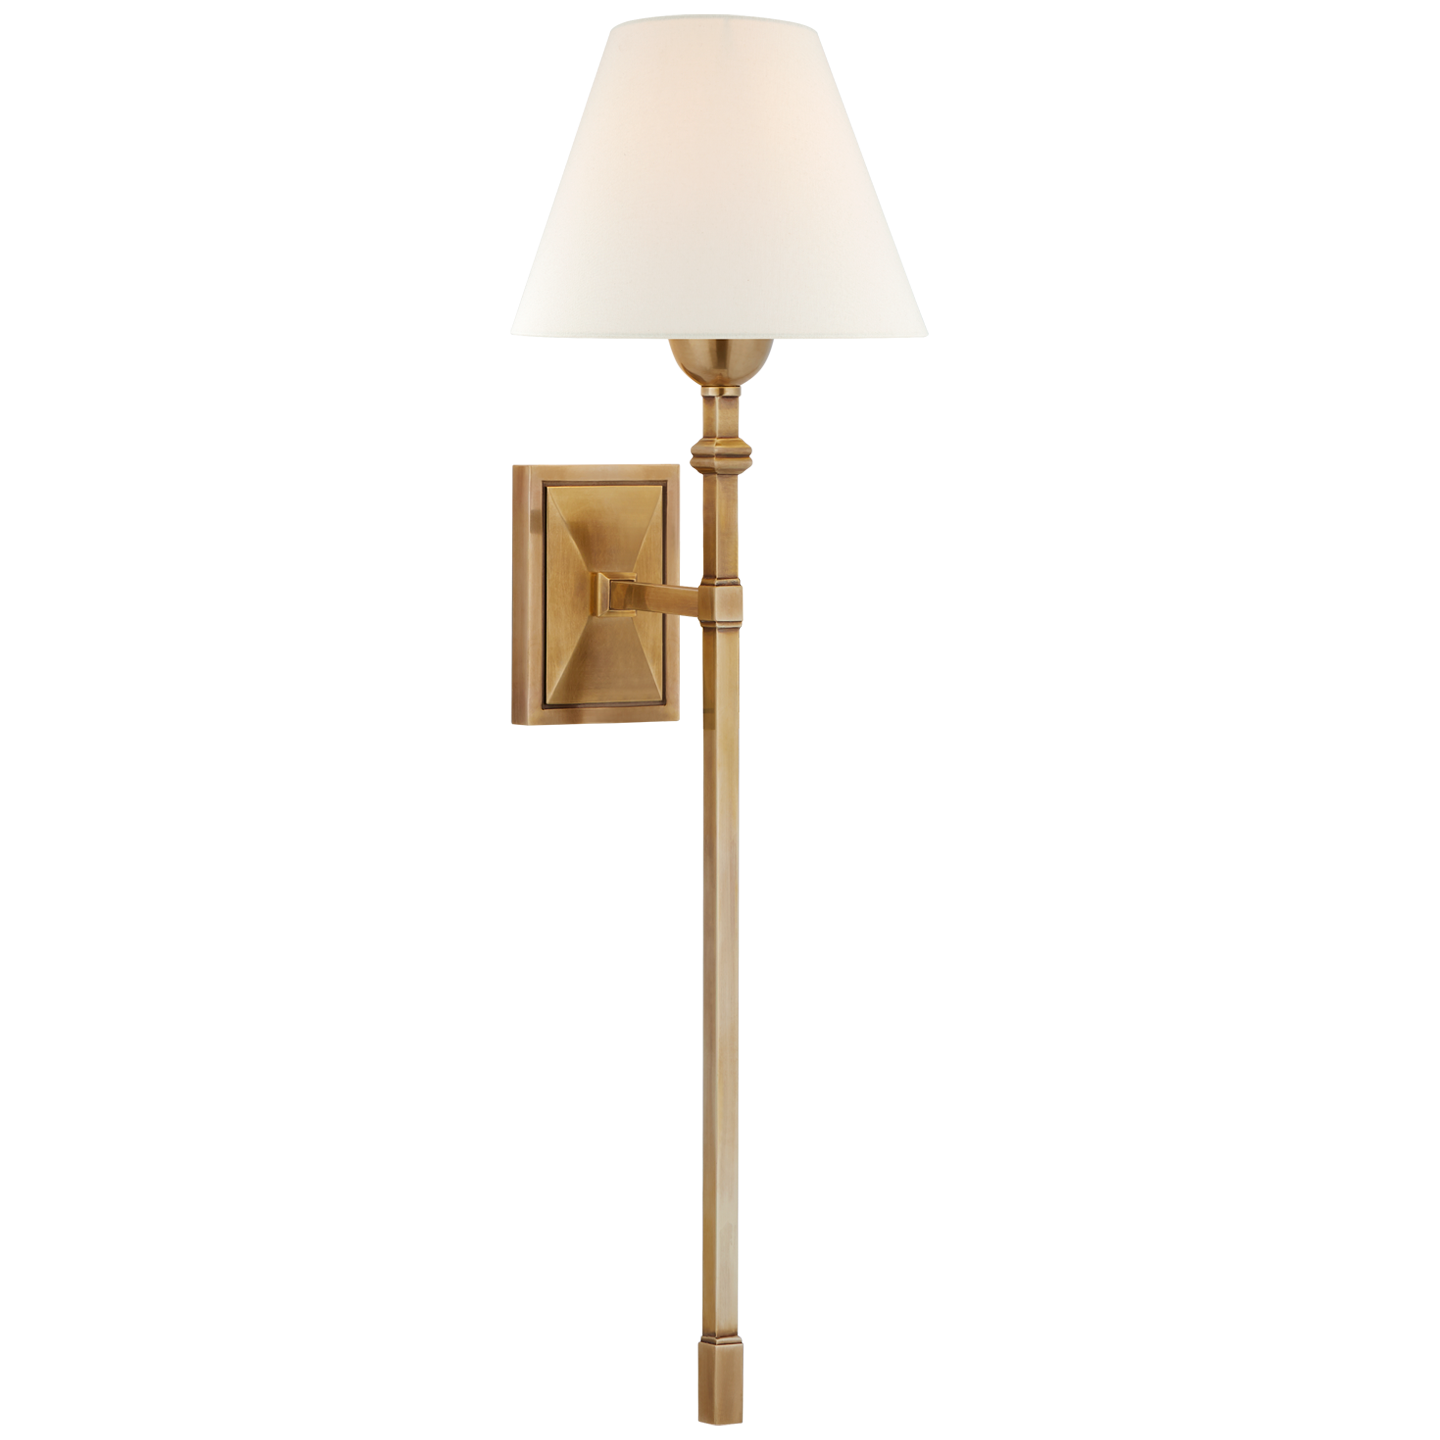 Jane Tail Wall Sconce